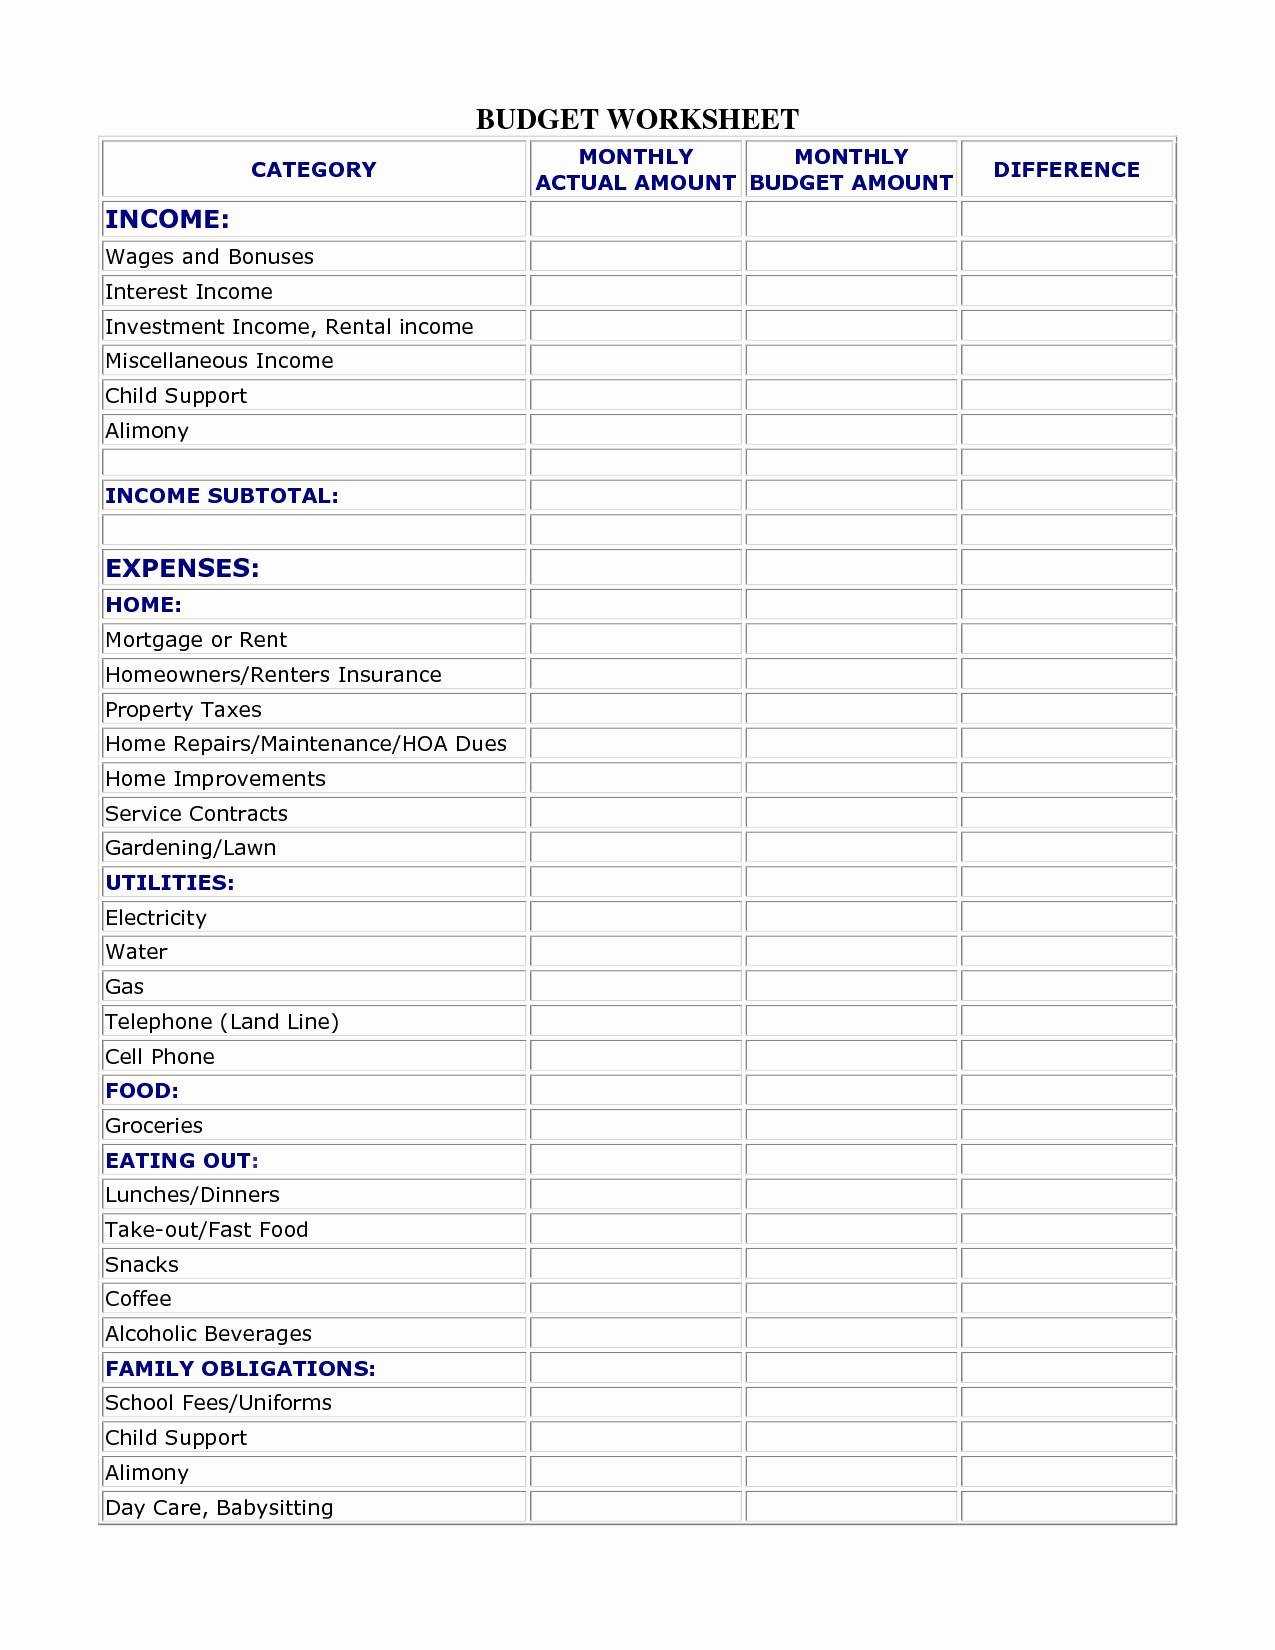 Monthly Budget Worksheet Pdf Along with Bud List for Bills Template